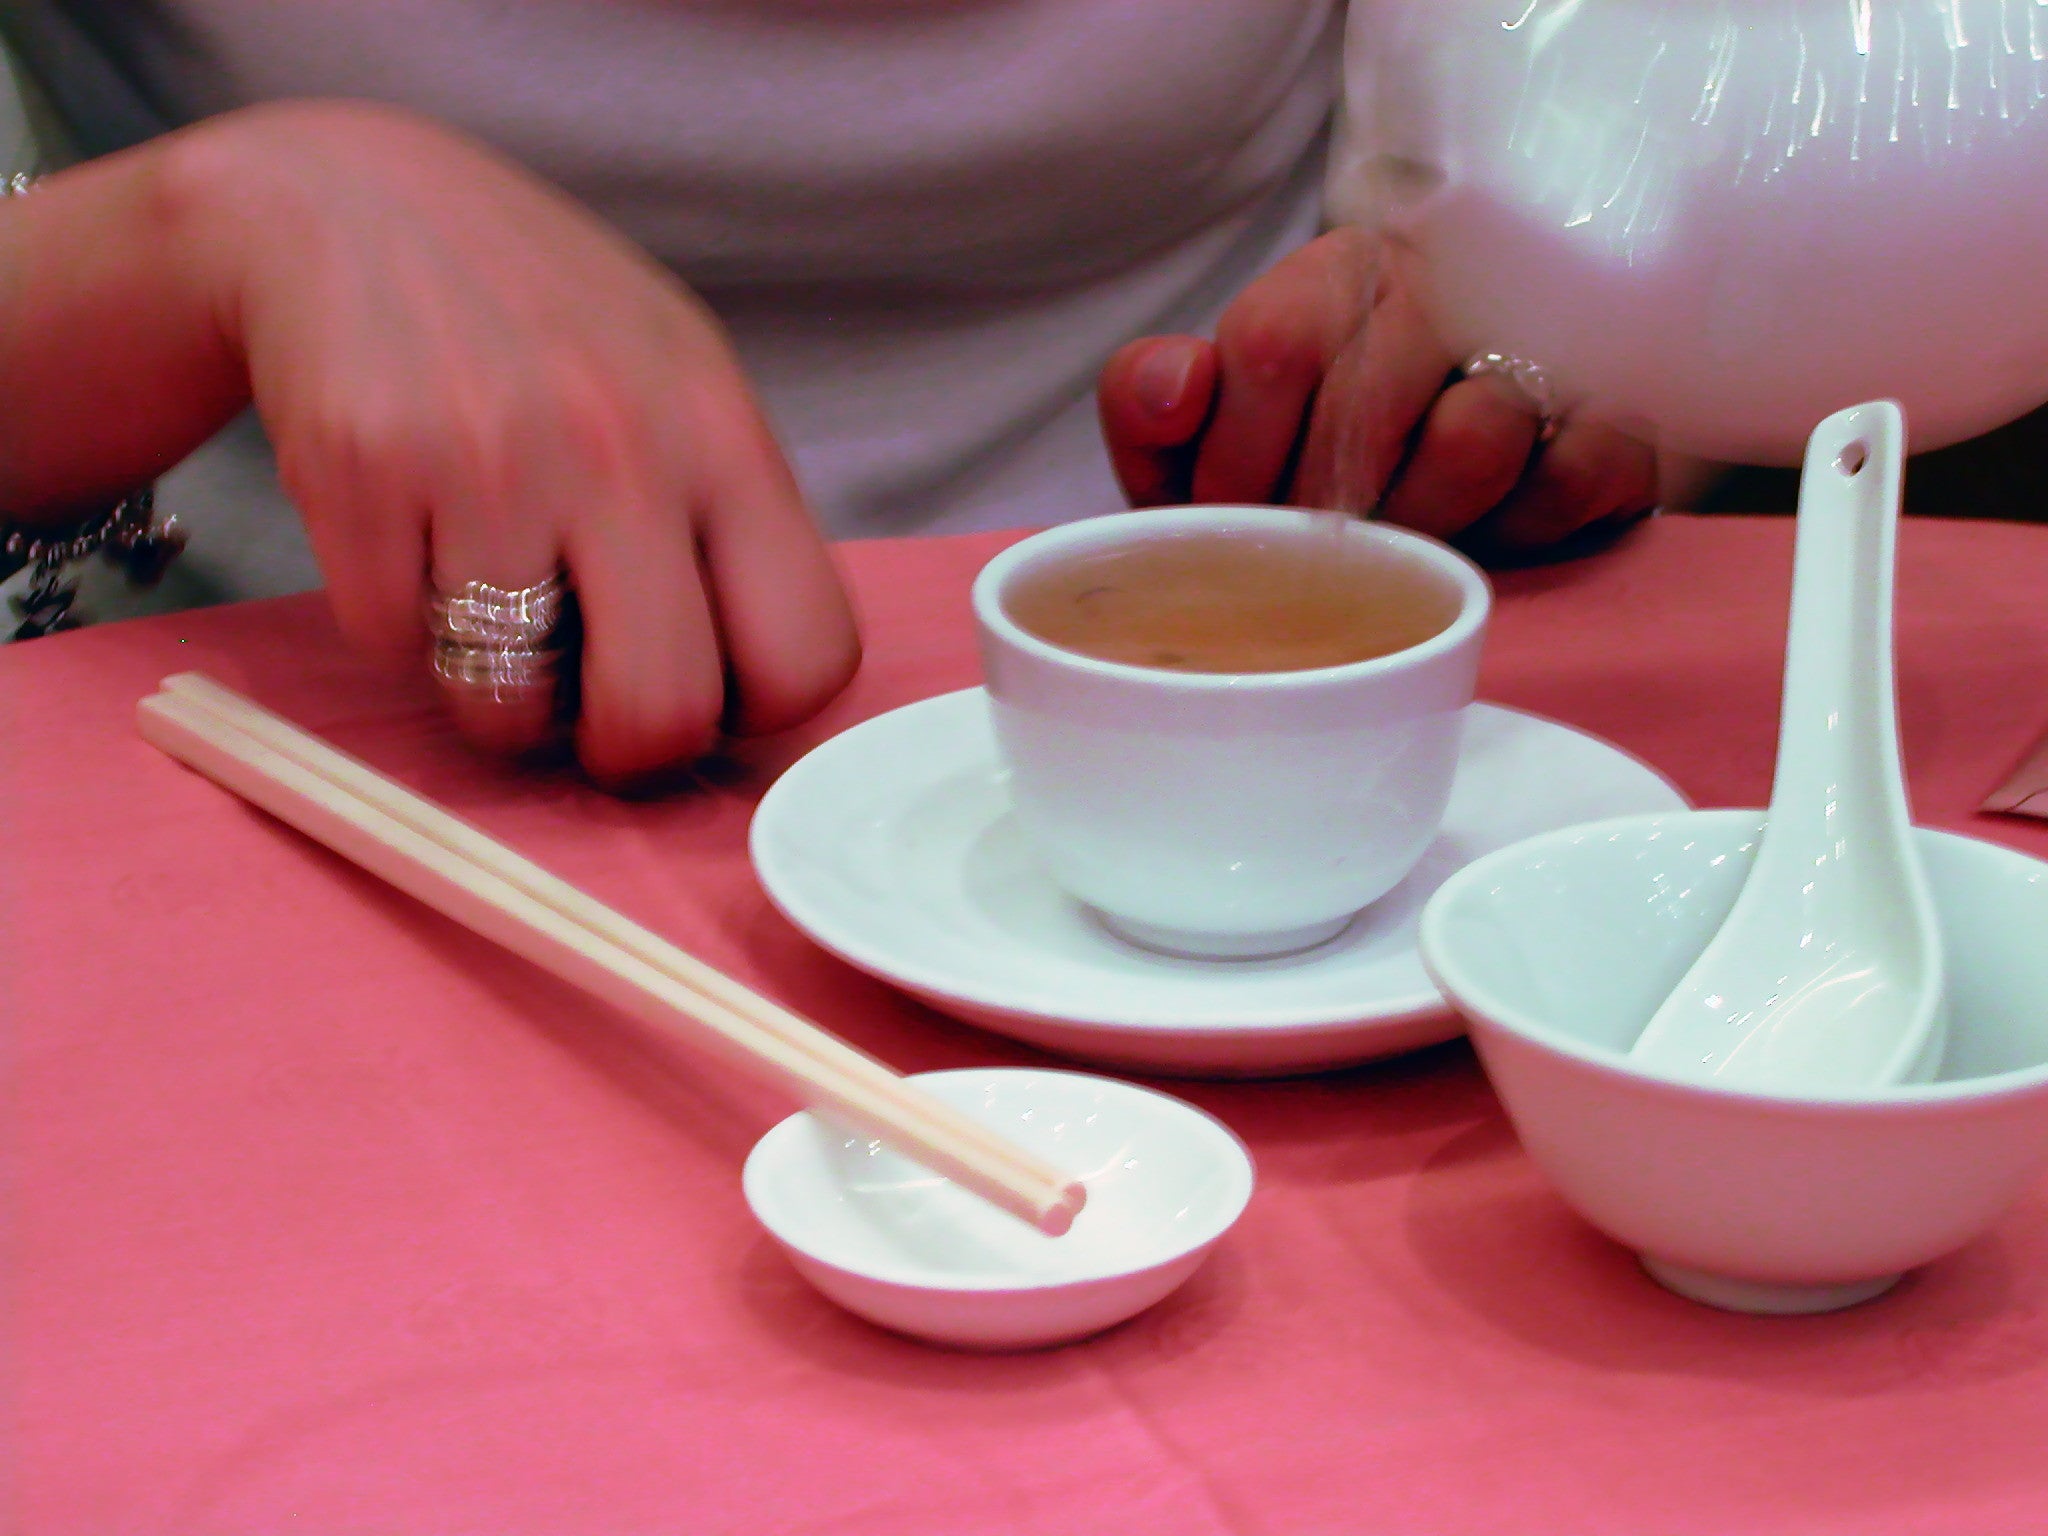 Why The Chinese Tap 2 Fingers with Every Pour of Tea